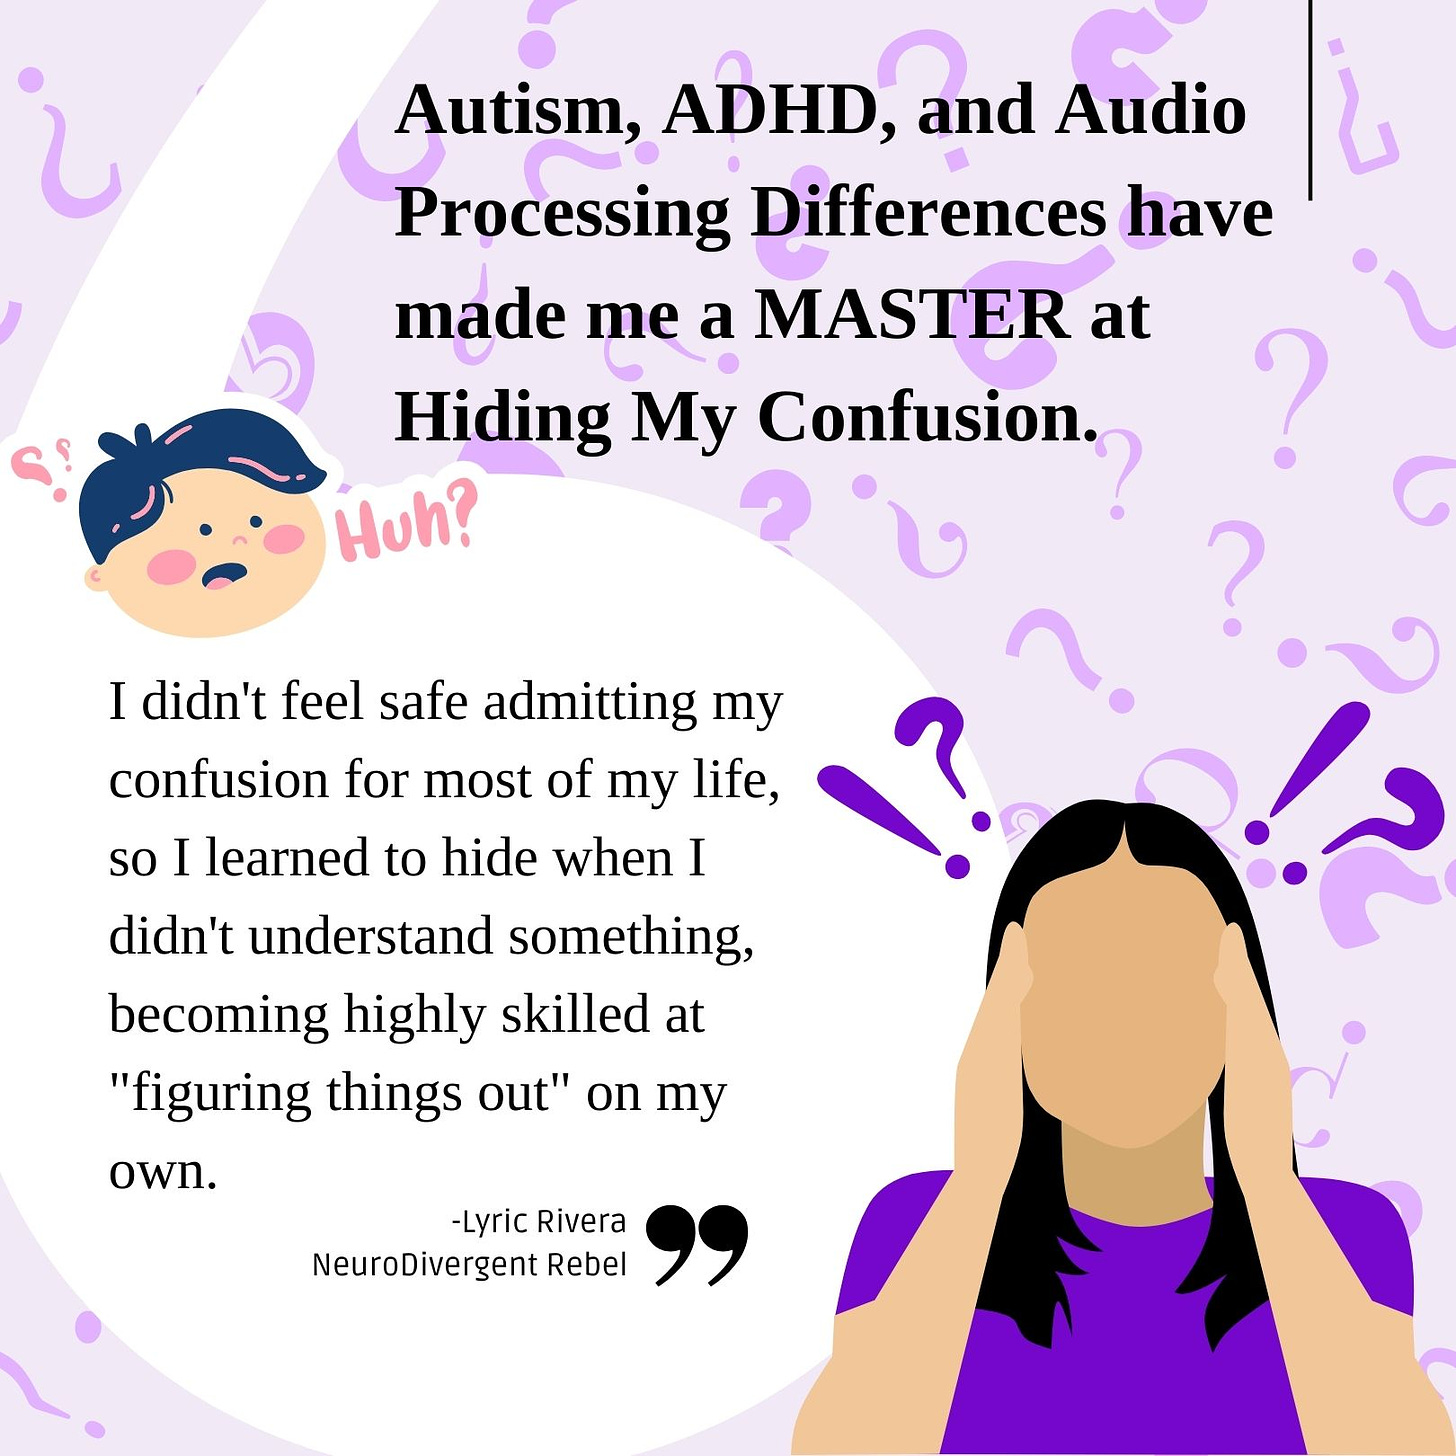 Autism, ADHD, and Audio Processing Differences have made me a MASTER at Hiding My Confusion. I didn't feel safe admitting my confusion for most of my life, so I learned to hide when I didn't understand something, becoming highly skilled at "figuring things out" on my own.